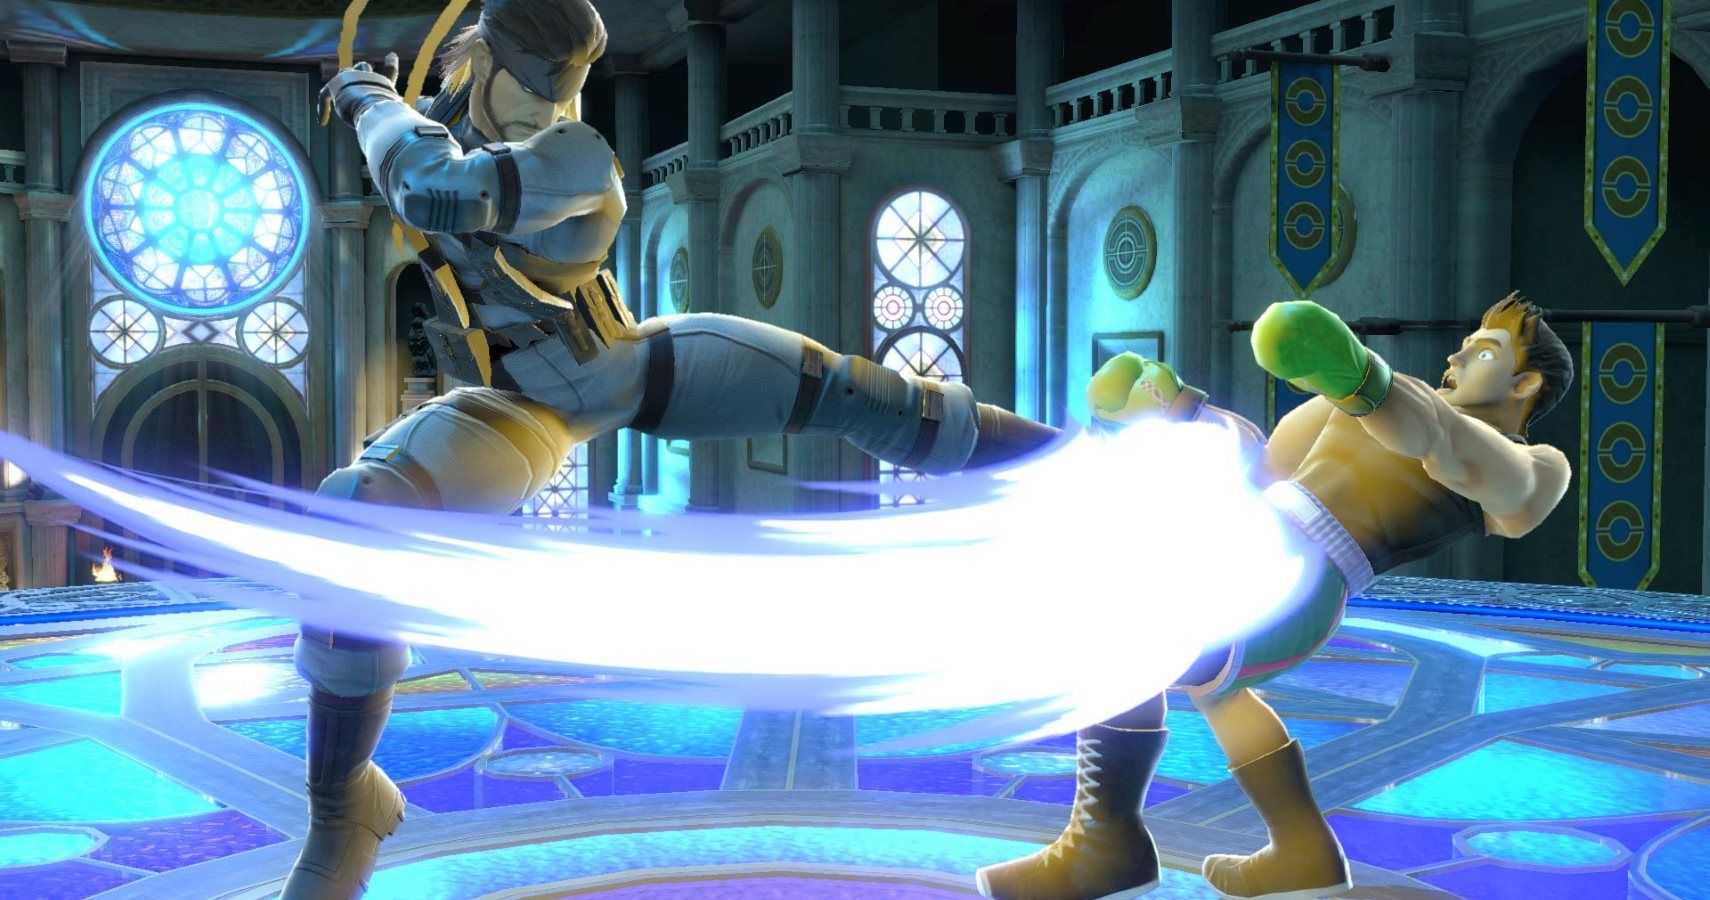 Super Smash Bros Ultimate Portals Are Taking The Fight To A Whole New Level